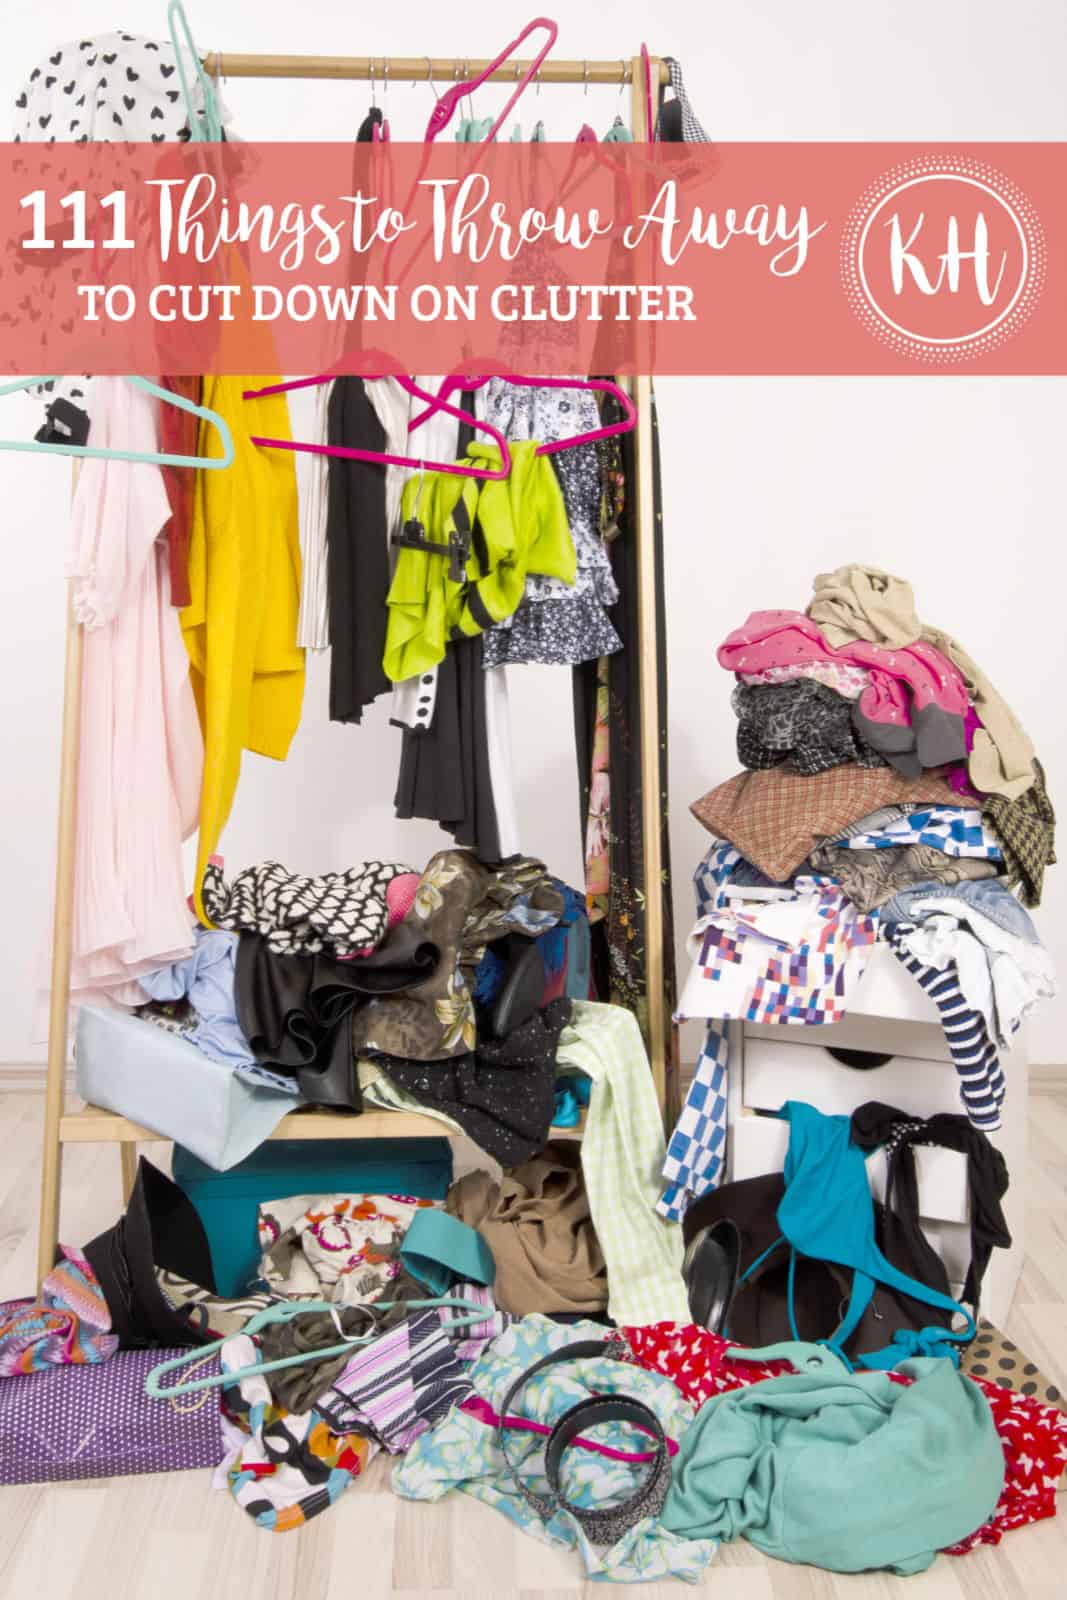 https://hungryfoodie.com/wp-content/uploads/2016/12/111-Things-to-Throw-Away-to-Cut-Down-on-Clutter-Kyndra-Holley.jpg